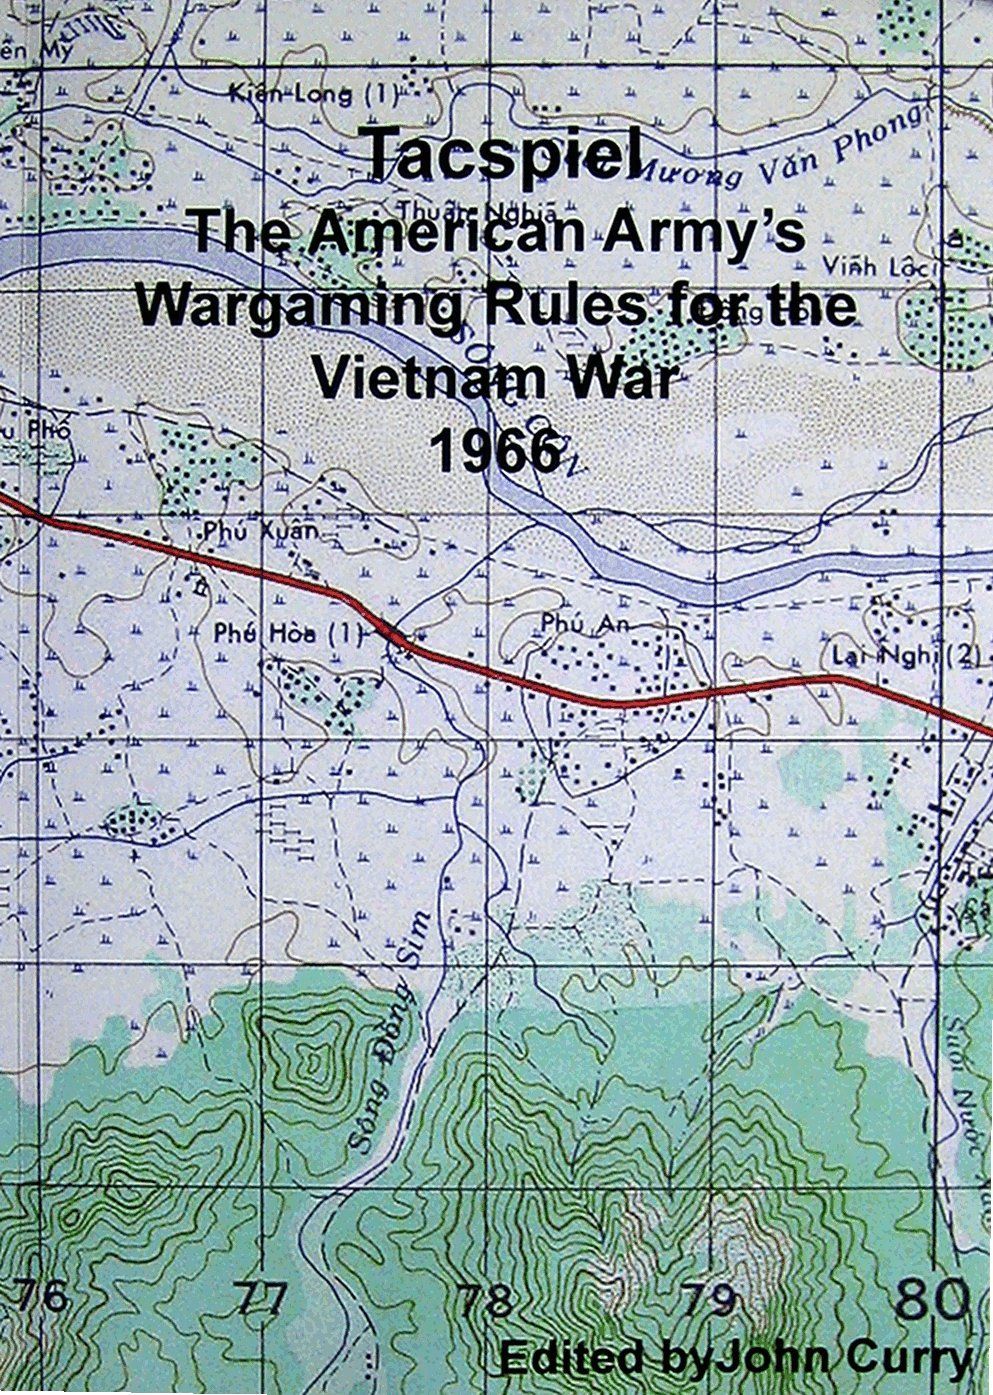 Tacspiel: The American Army's War Game of the Vietnam War